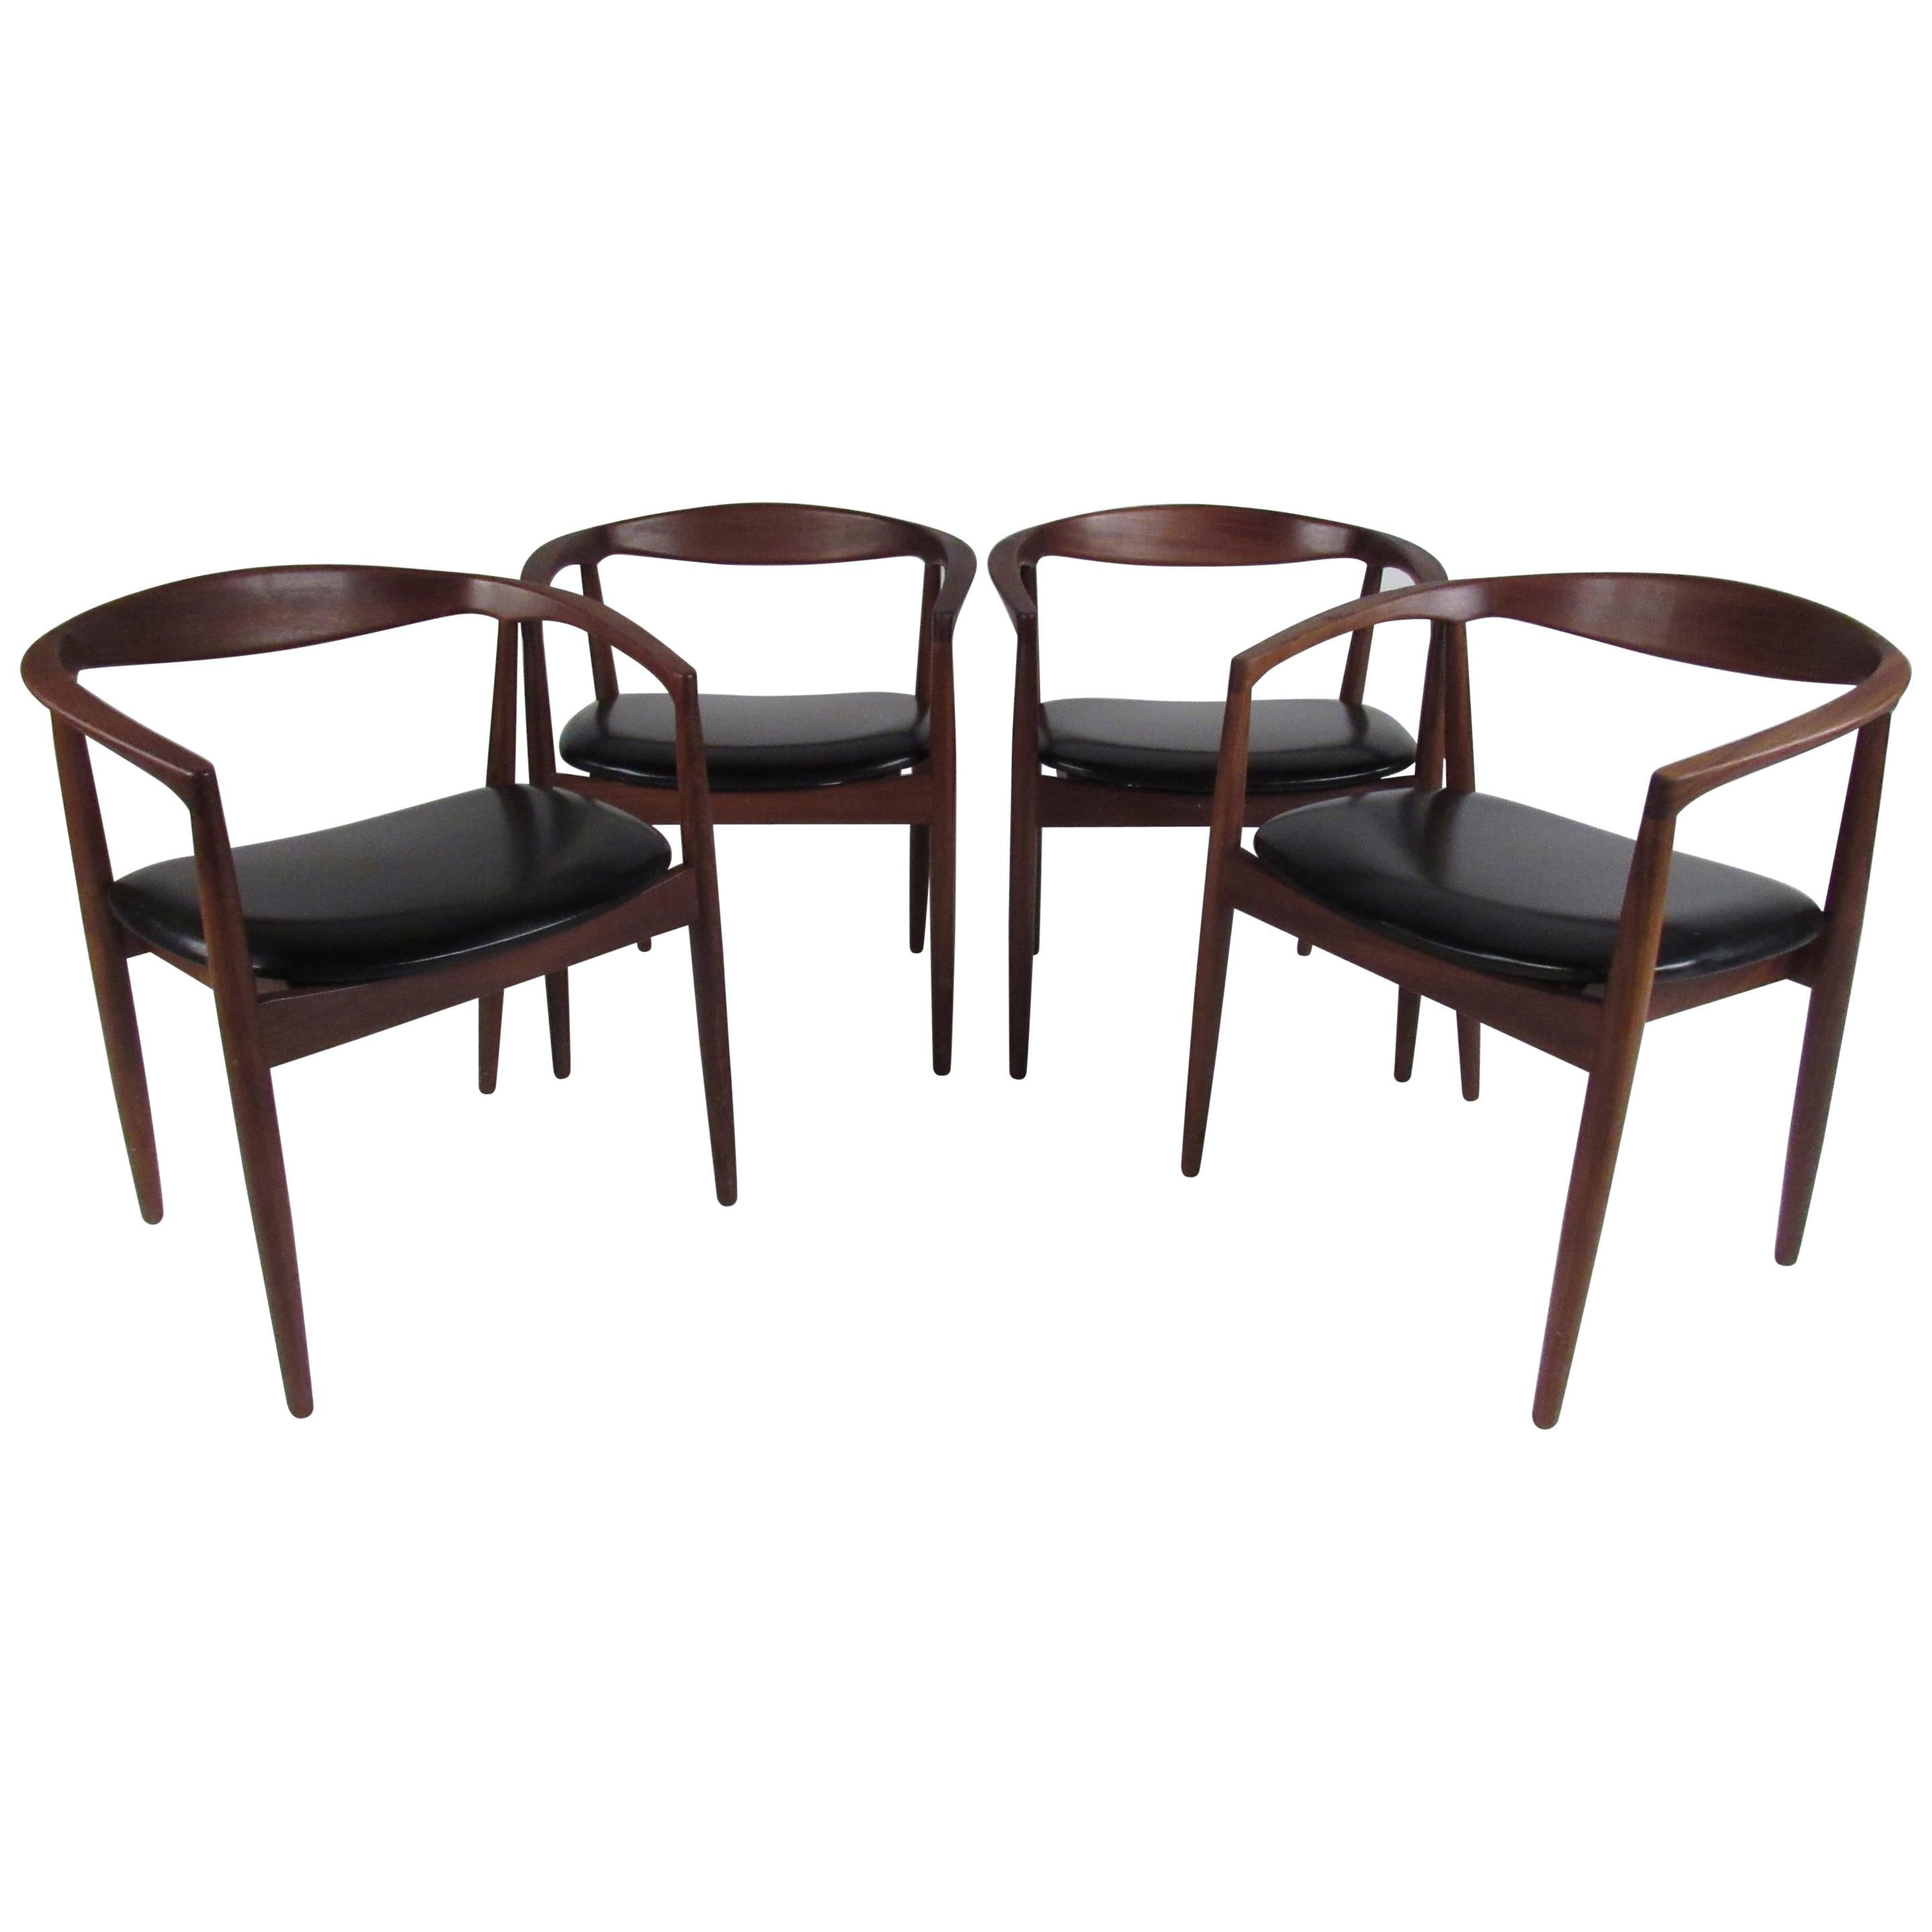 Set of Four Danish Modern Dining Chairs For Sale